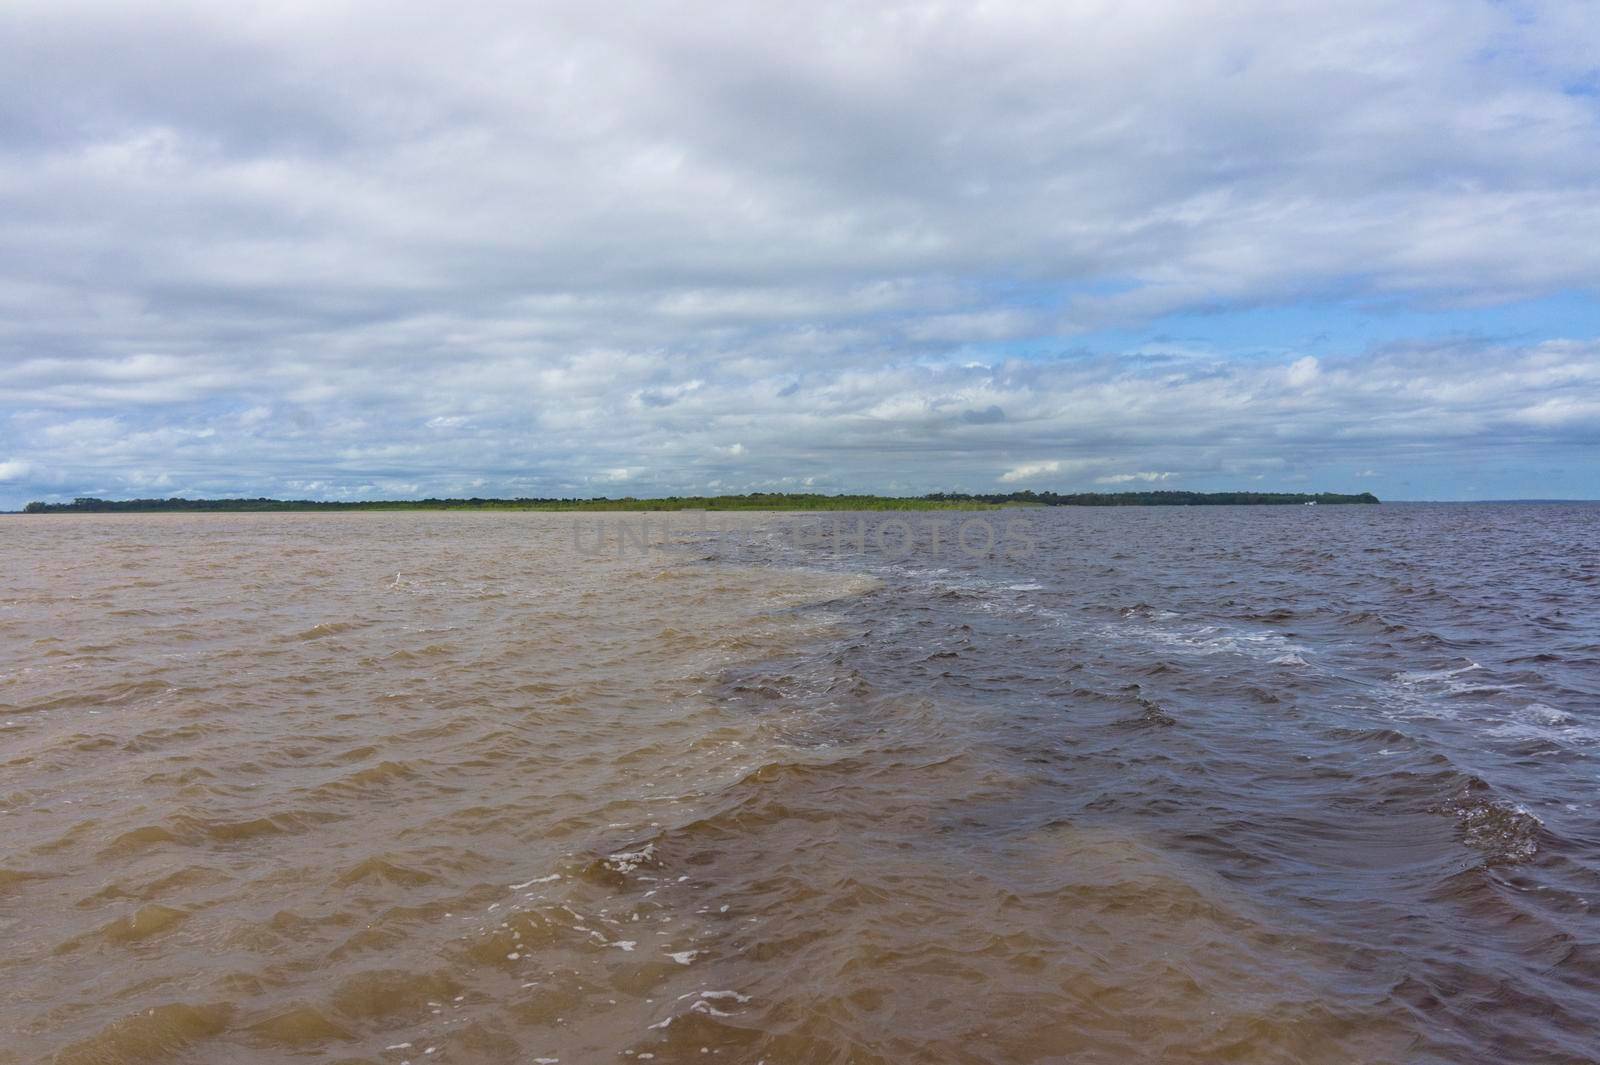 Amazon river, Meeting of Waters near Manaus, Brazil, South America